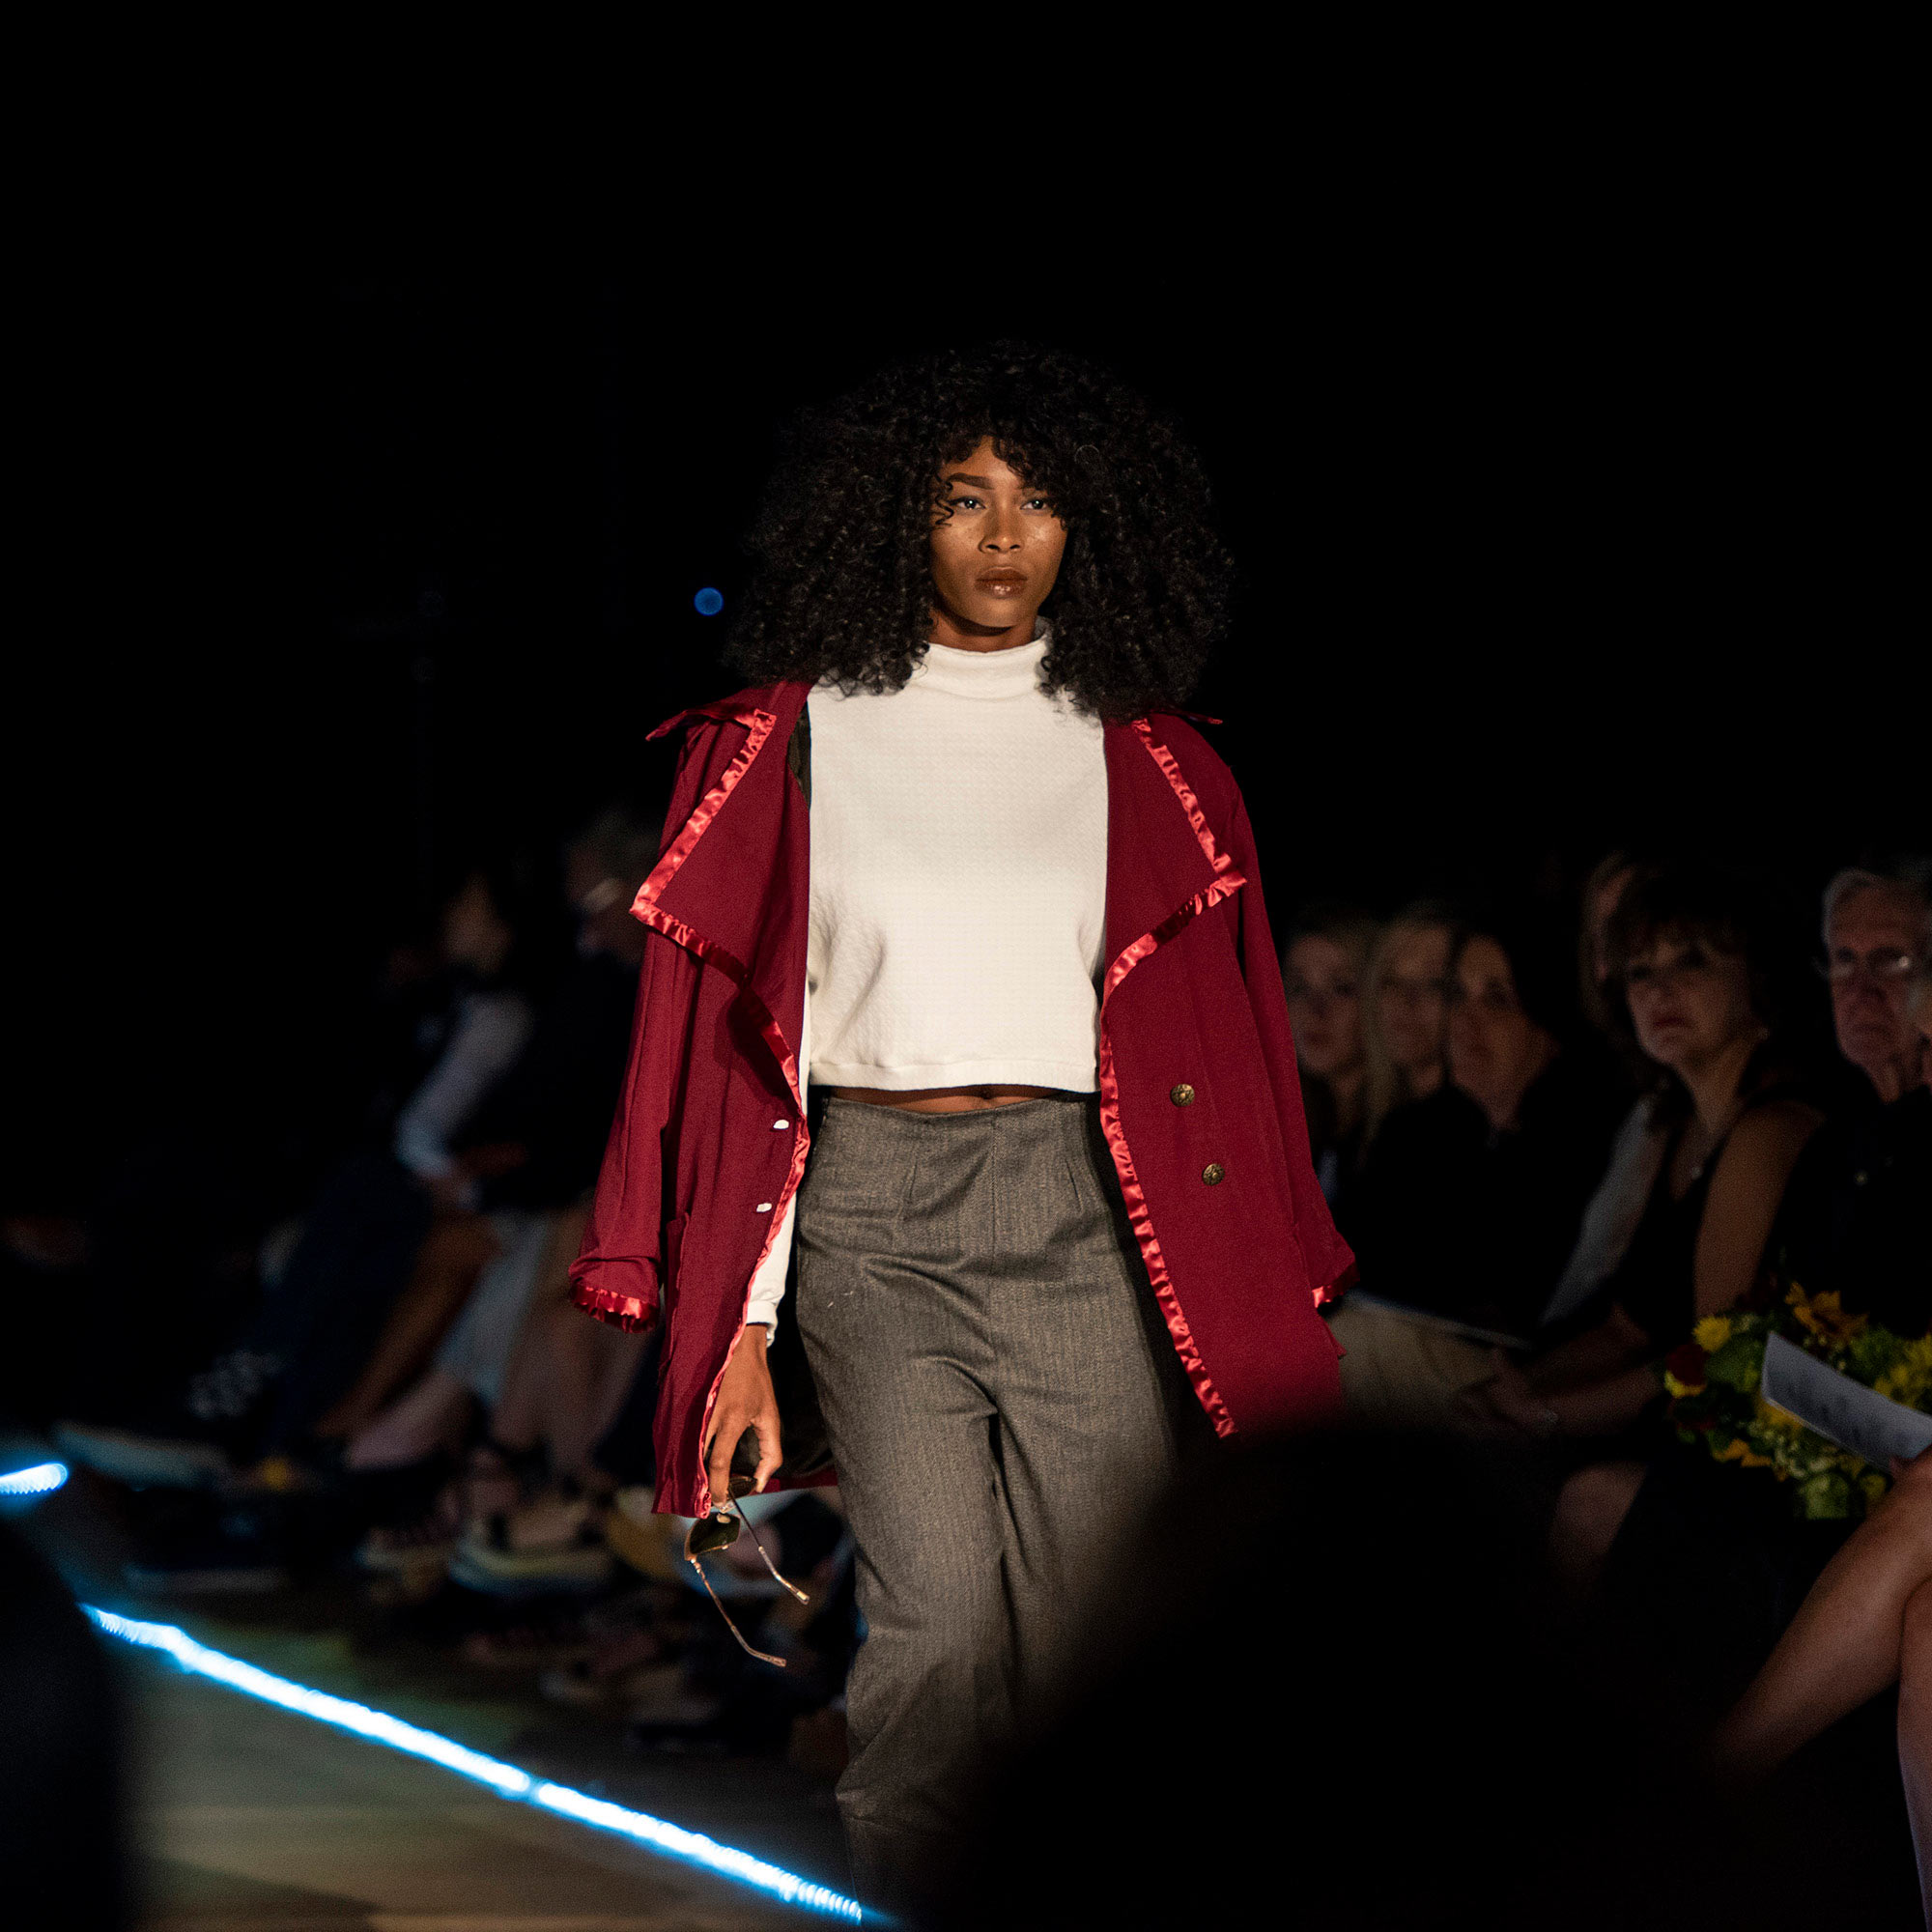 Model walking the runway in a marron coat and grey pants during The Fashion Event: Mod.